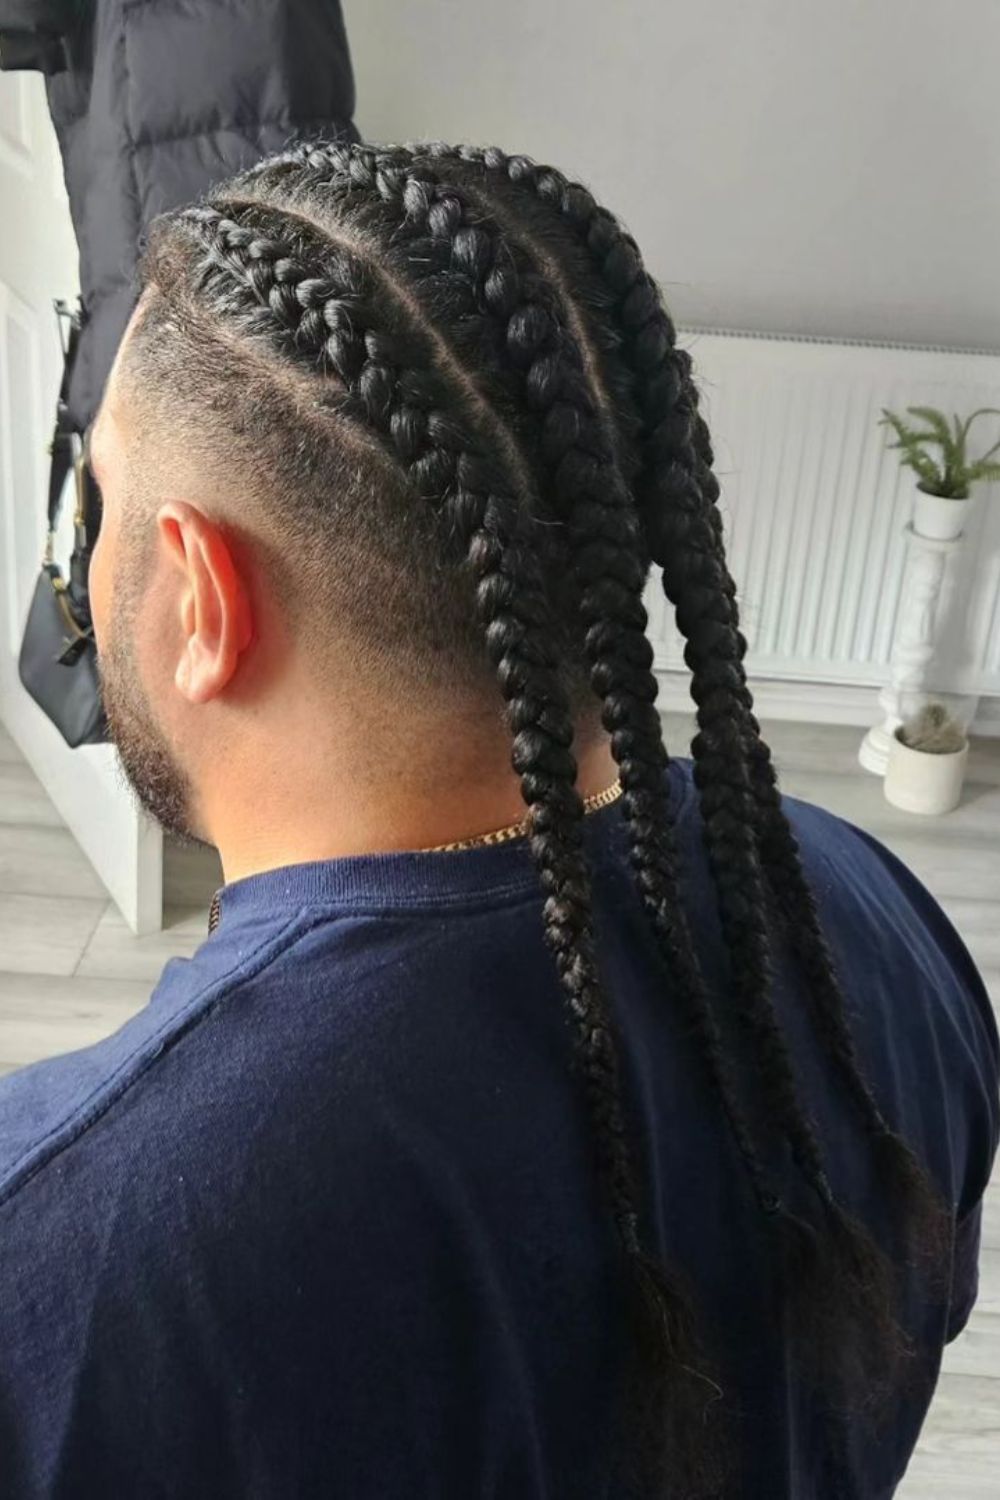 A man with long chunky braids.